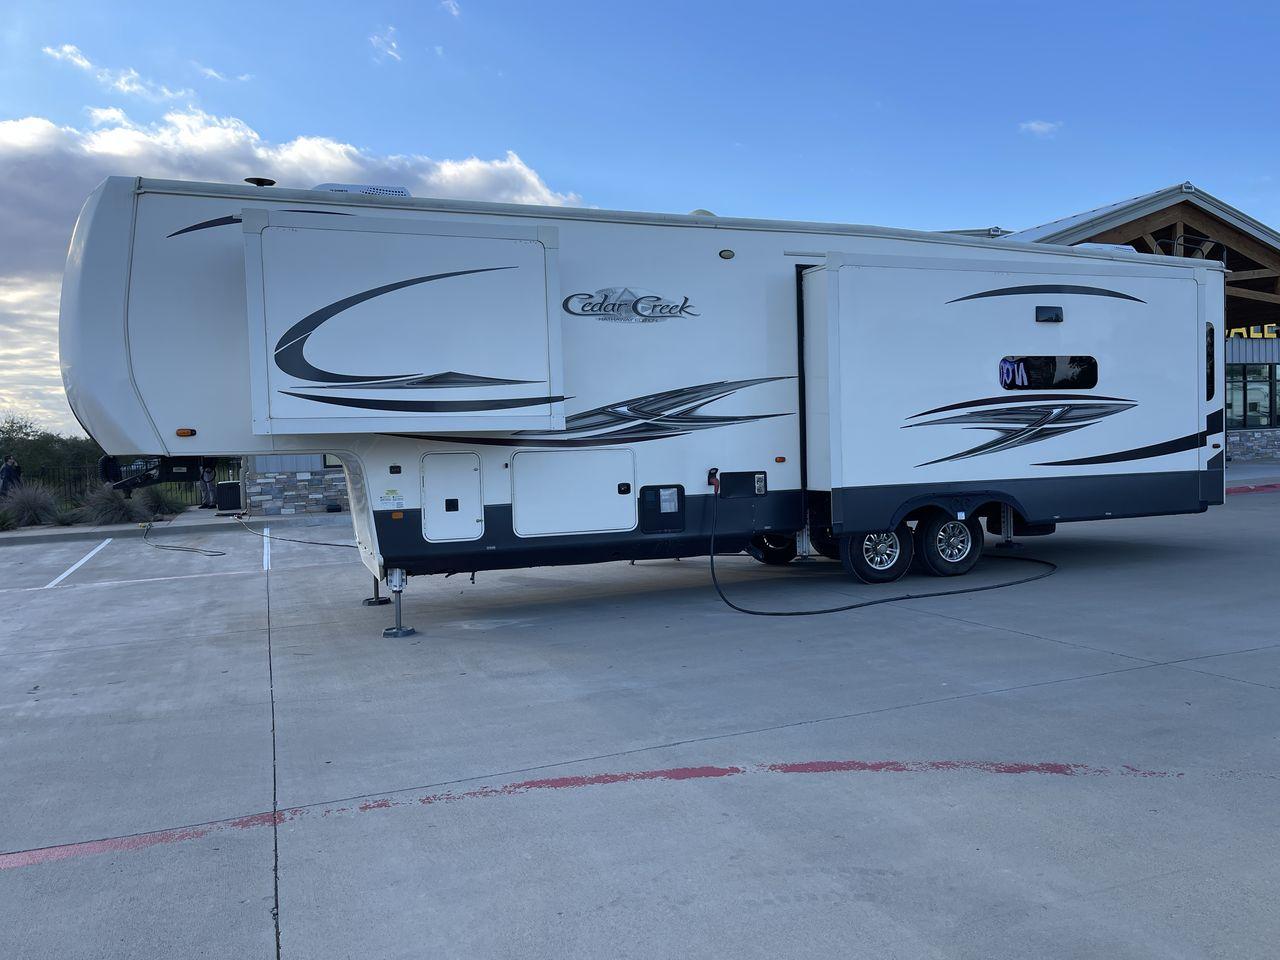 2020 TAN FOREST RIVER CEDAR CREEK HATHAWAY (4X4FCRM28LS) , Length: 38.83 ft. | Dry Weight: 13,134 lbs. | Gross Weight: 16,525 lbs. | Slides: 3 transmission, located at 4319 N Main St, Cleburne, TX, 76033, (817) 678-5133, 32.385960, -97.391212 - This 2020 Cedar Creek Hathaway 36CK2 fifth wheel has a length of 38.83 ft, a width of 8 ft, and a height of 13.42 ft. This fifth wheel has a dry weight of 13,134 lbs and a payload capacity of 3,391. The GVWR is 16,525 lbs and has a hitch weight of 2,525 lbs. The Cedar Creek has a true gel coat finis - Photo #24